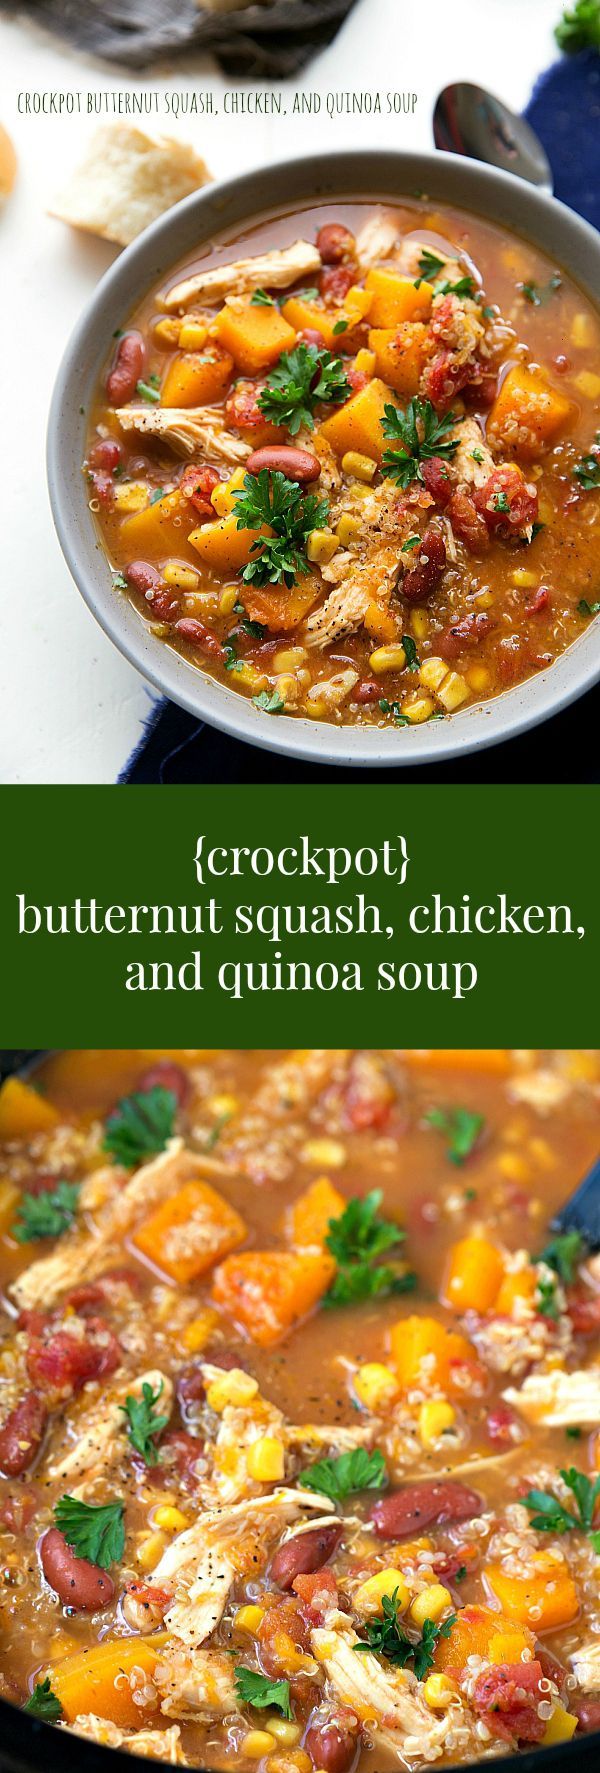 Dump it and forget it!! A super simple slow cooker butternut squash, chicken, and quinoa soup. The crockpot does all the work!